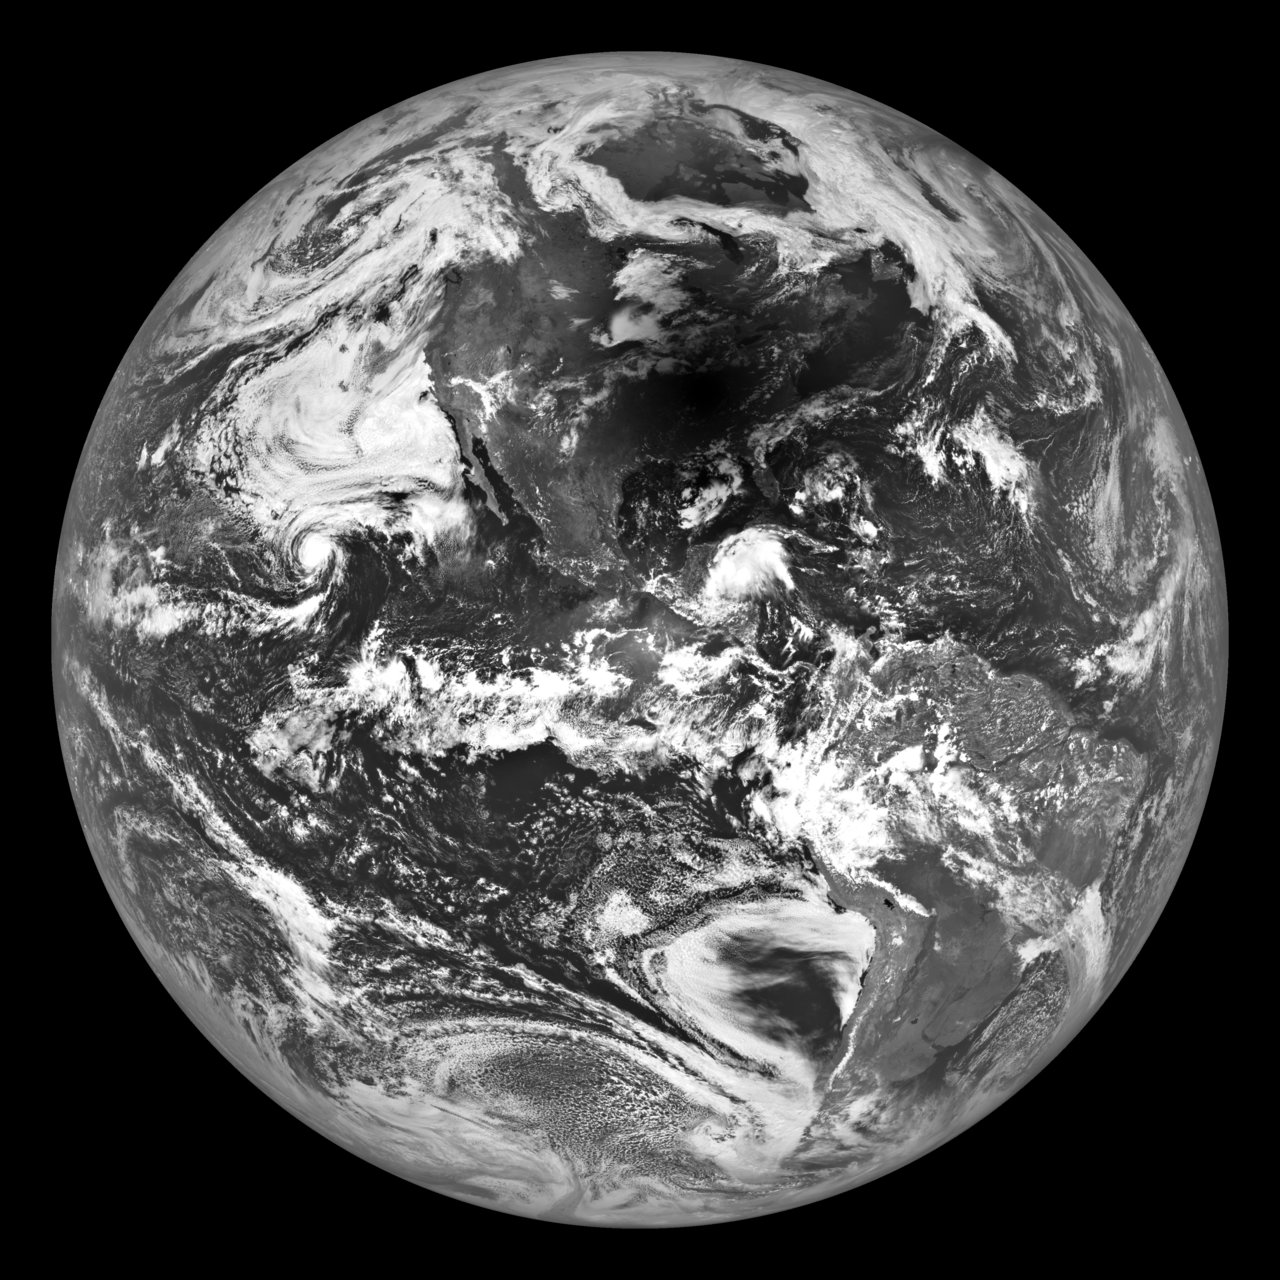 NASA’s Lunar Reconnaissance Orbiter shows the shadow of the Moon cast on the United States during the Aug. 21, 2017, total solar eclipse. Credits: NASA/GSFC/Arizona State University